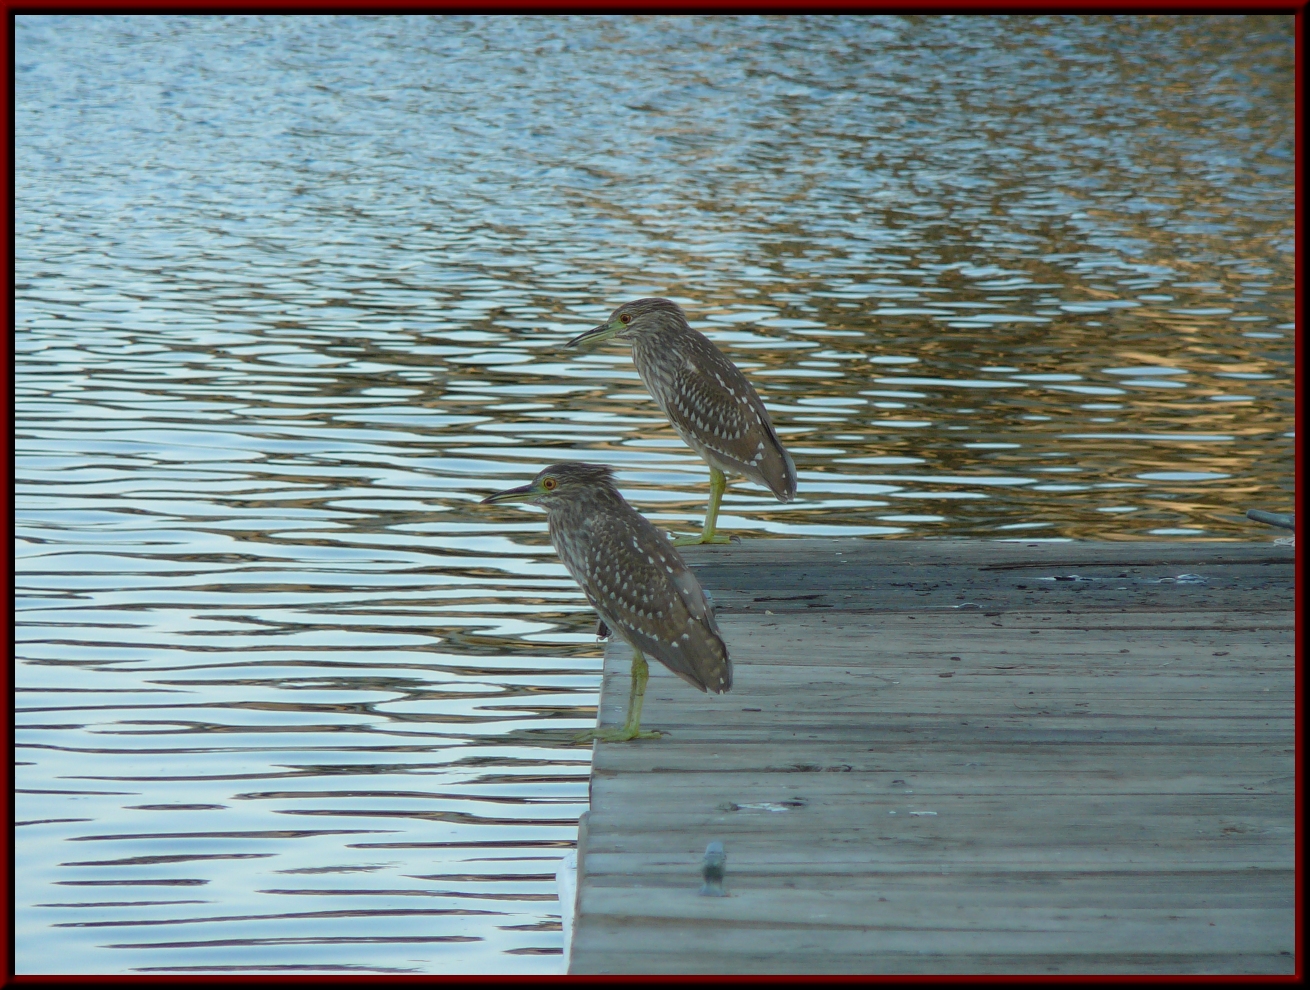 photo of young herons on a dock with rippling water in the background